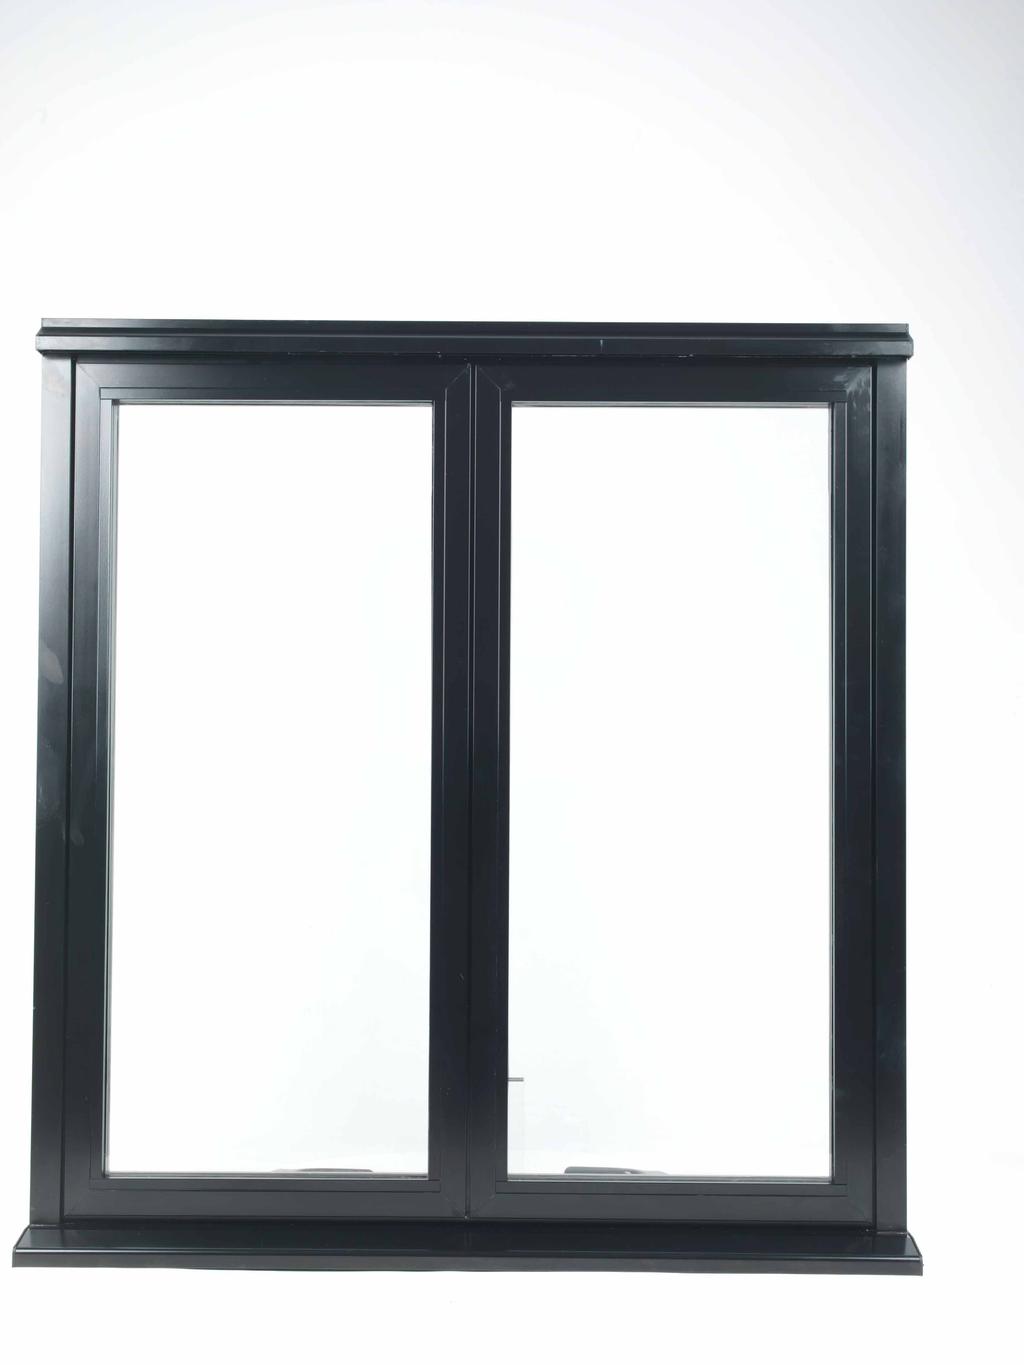 Aluminium Window Systems Aluminium is a smart choice for any renovation or homebuilding project.